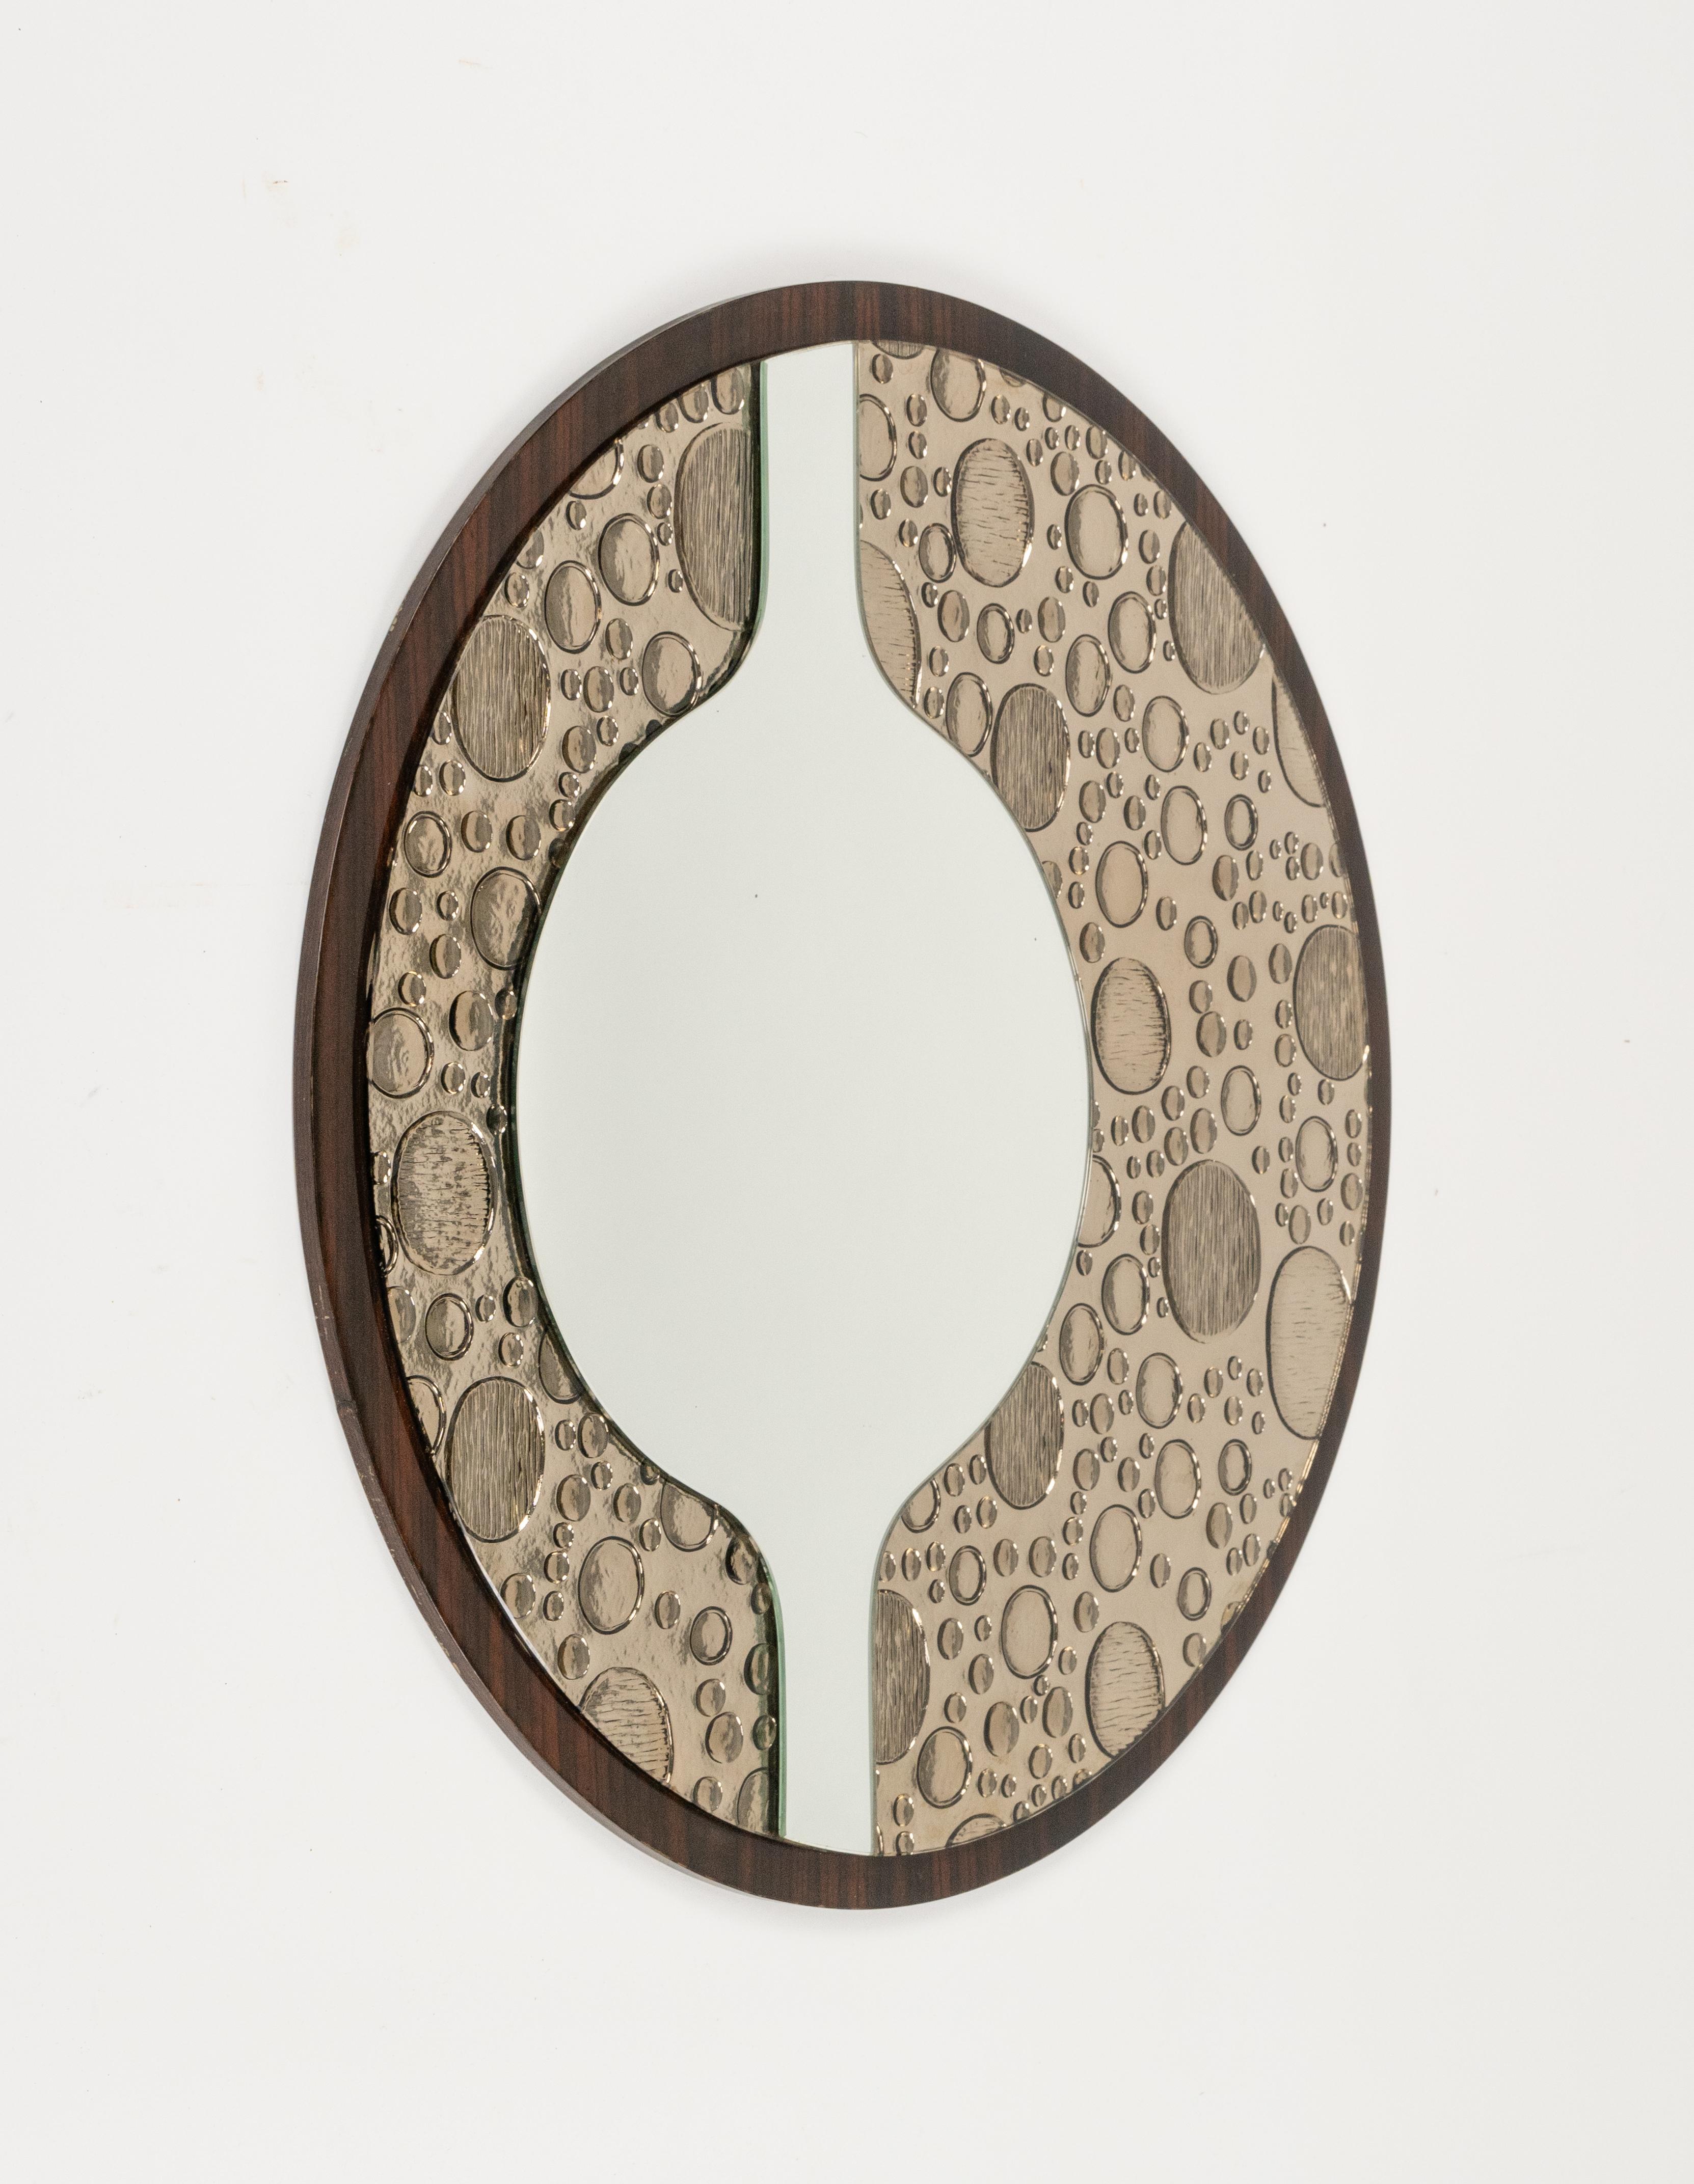 Italian Midcentury Round Wall Mirror in Wood and Glass, Italy 1970s For Sale